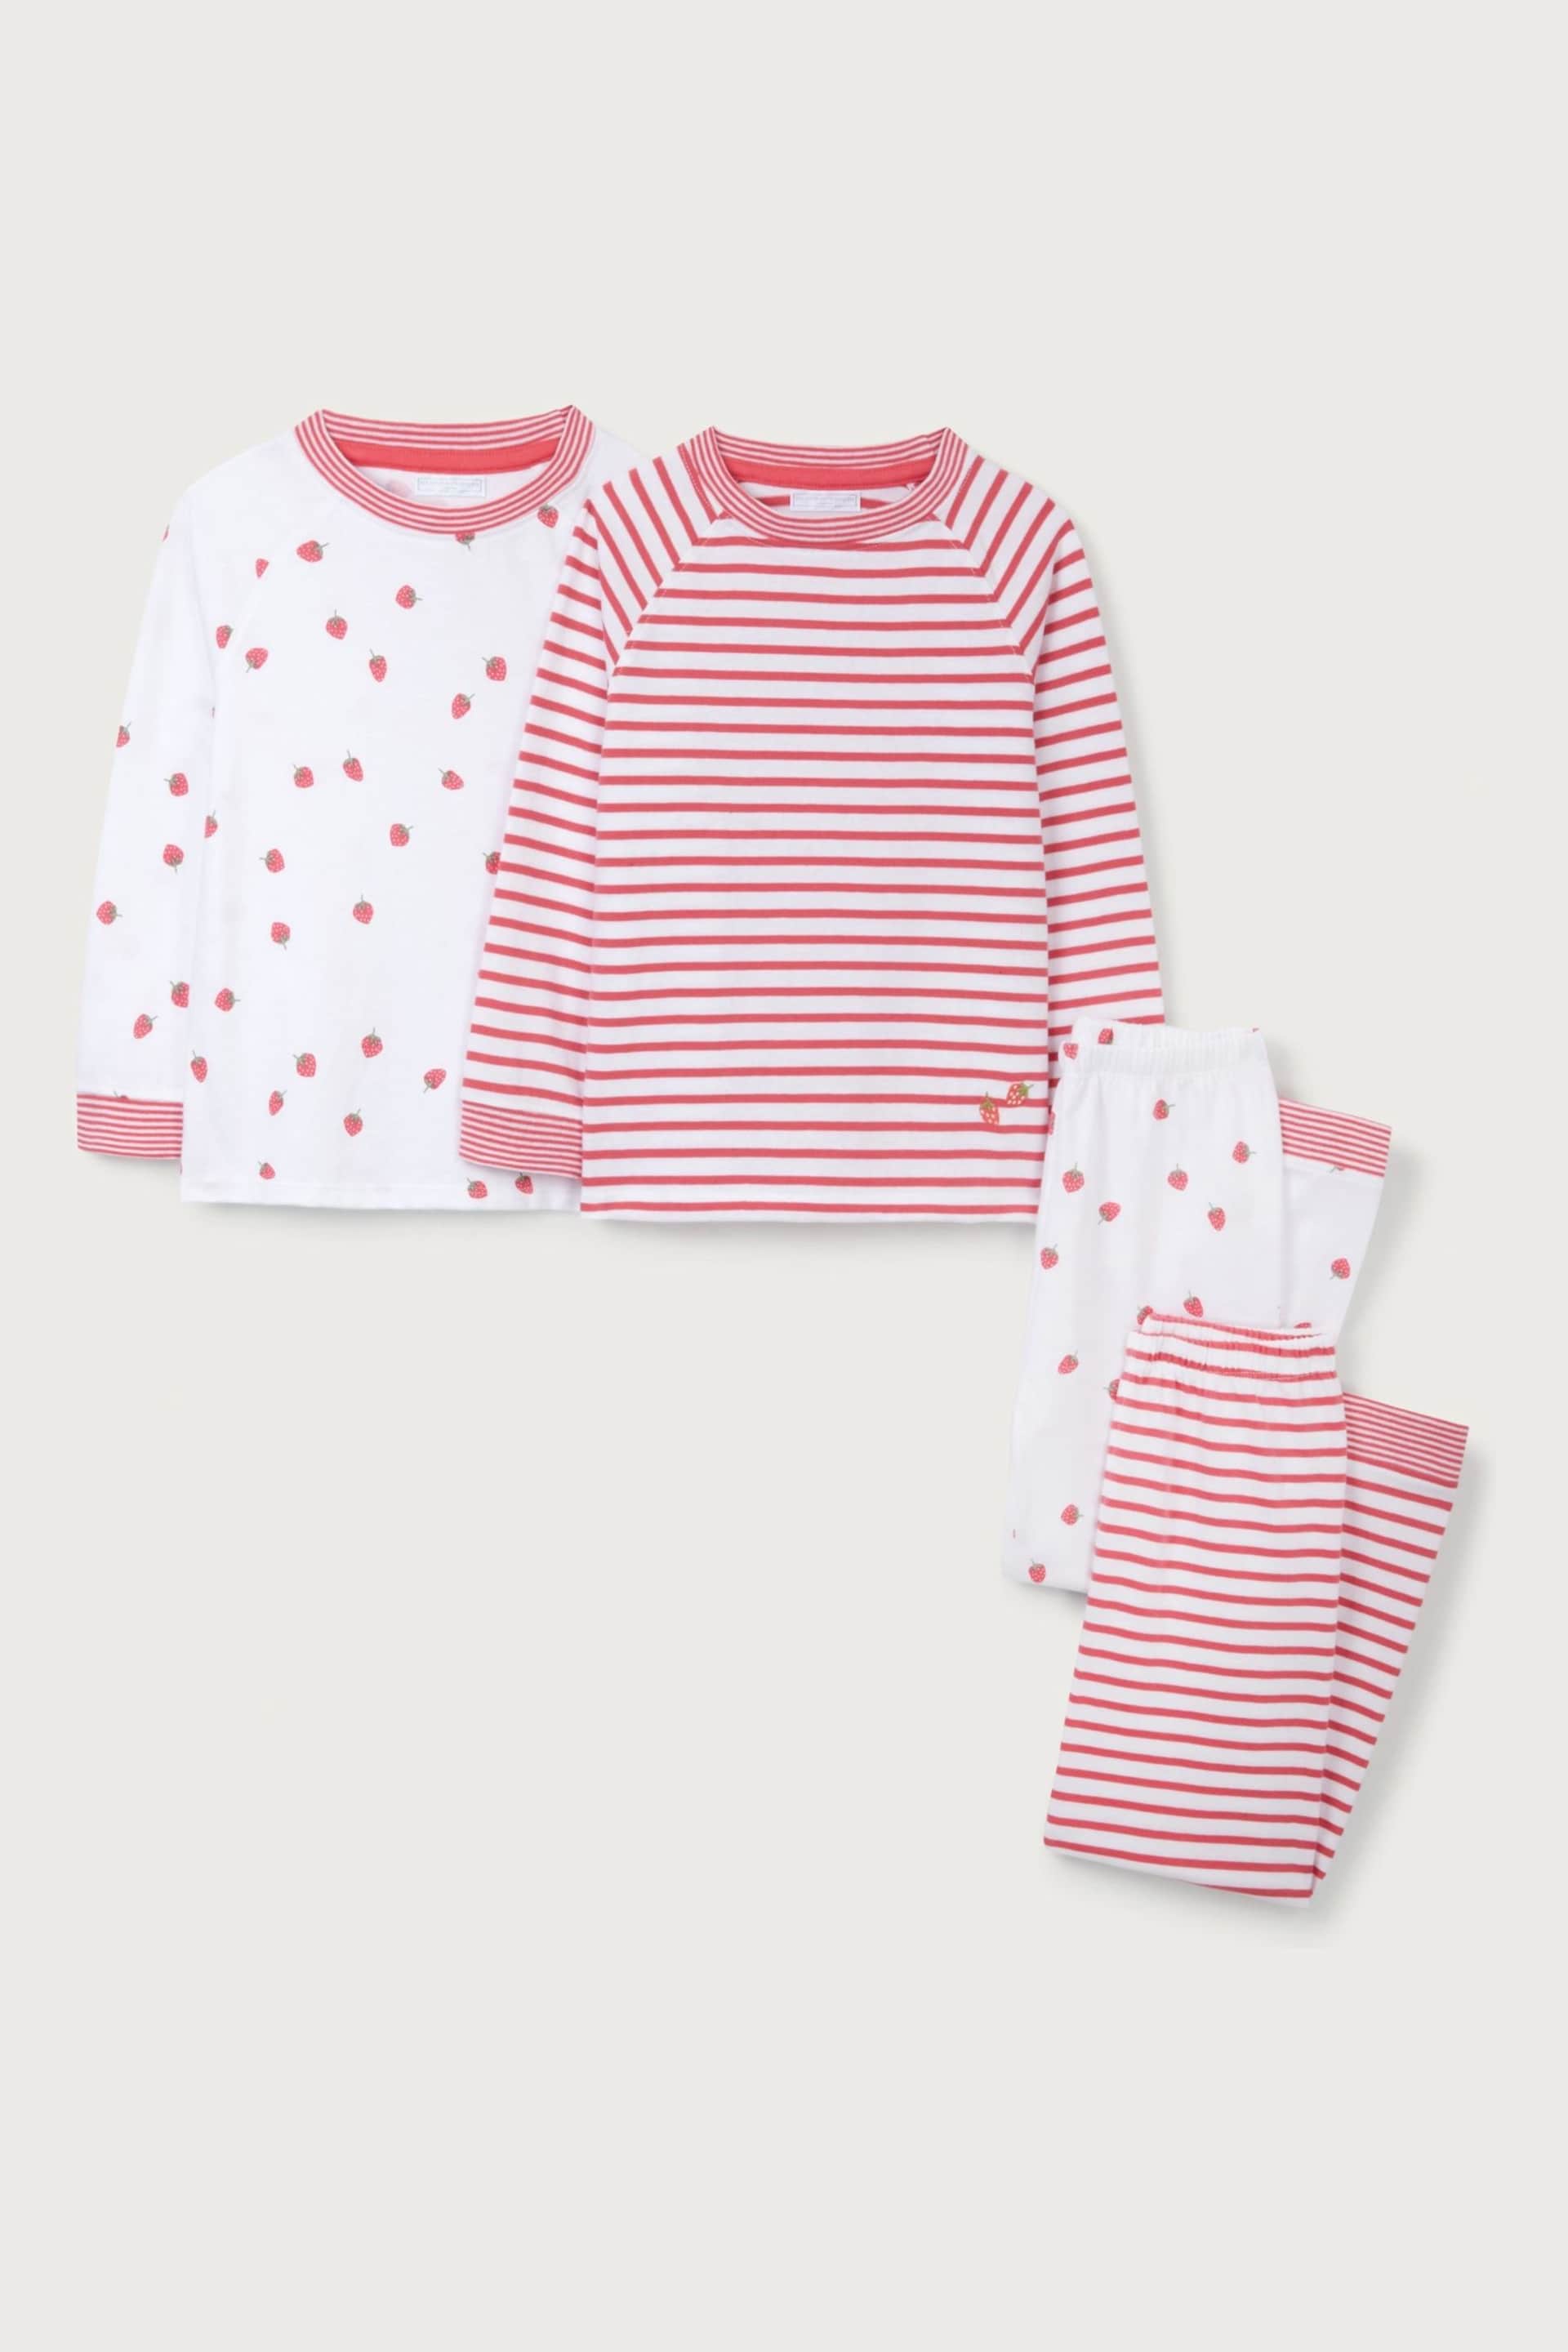 The White Company Cotton Strawberry And Stripe White Pyjamas 2 Pack - Image 5 of 6